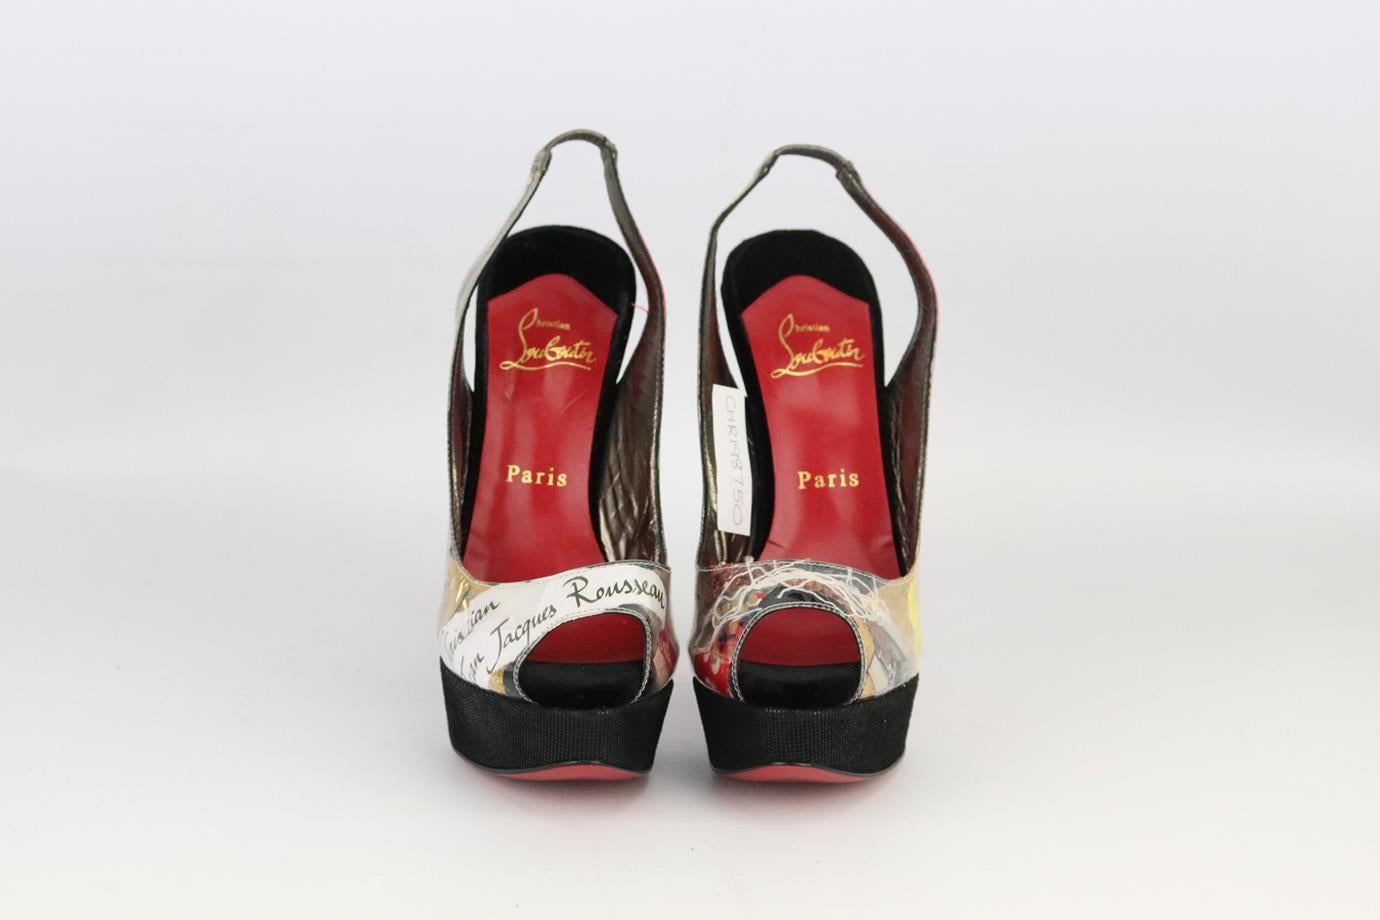 Christian Louboutin collage PVC and velvet slingback platform sandals. Made from collage PVC with velvet heels and set on the brand’s iconic red sole. Black. Slip on. Does not come with box or dustbag. Size: EU 38 (UK 5, US 8). Insole: 9.3 in. Heel: